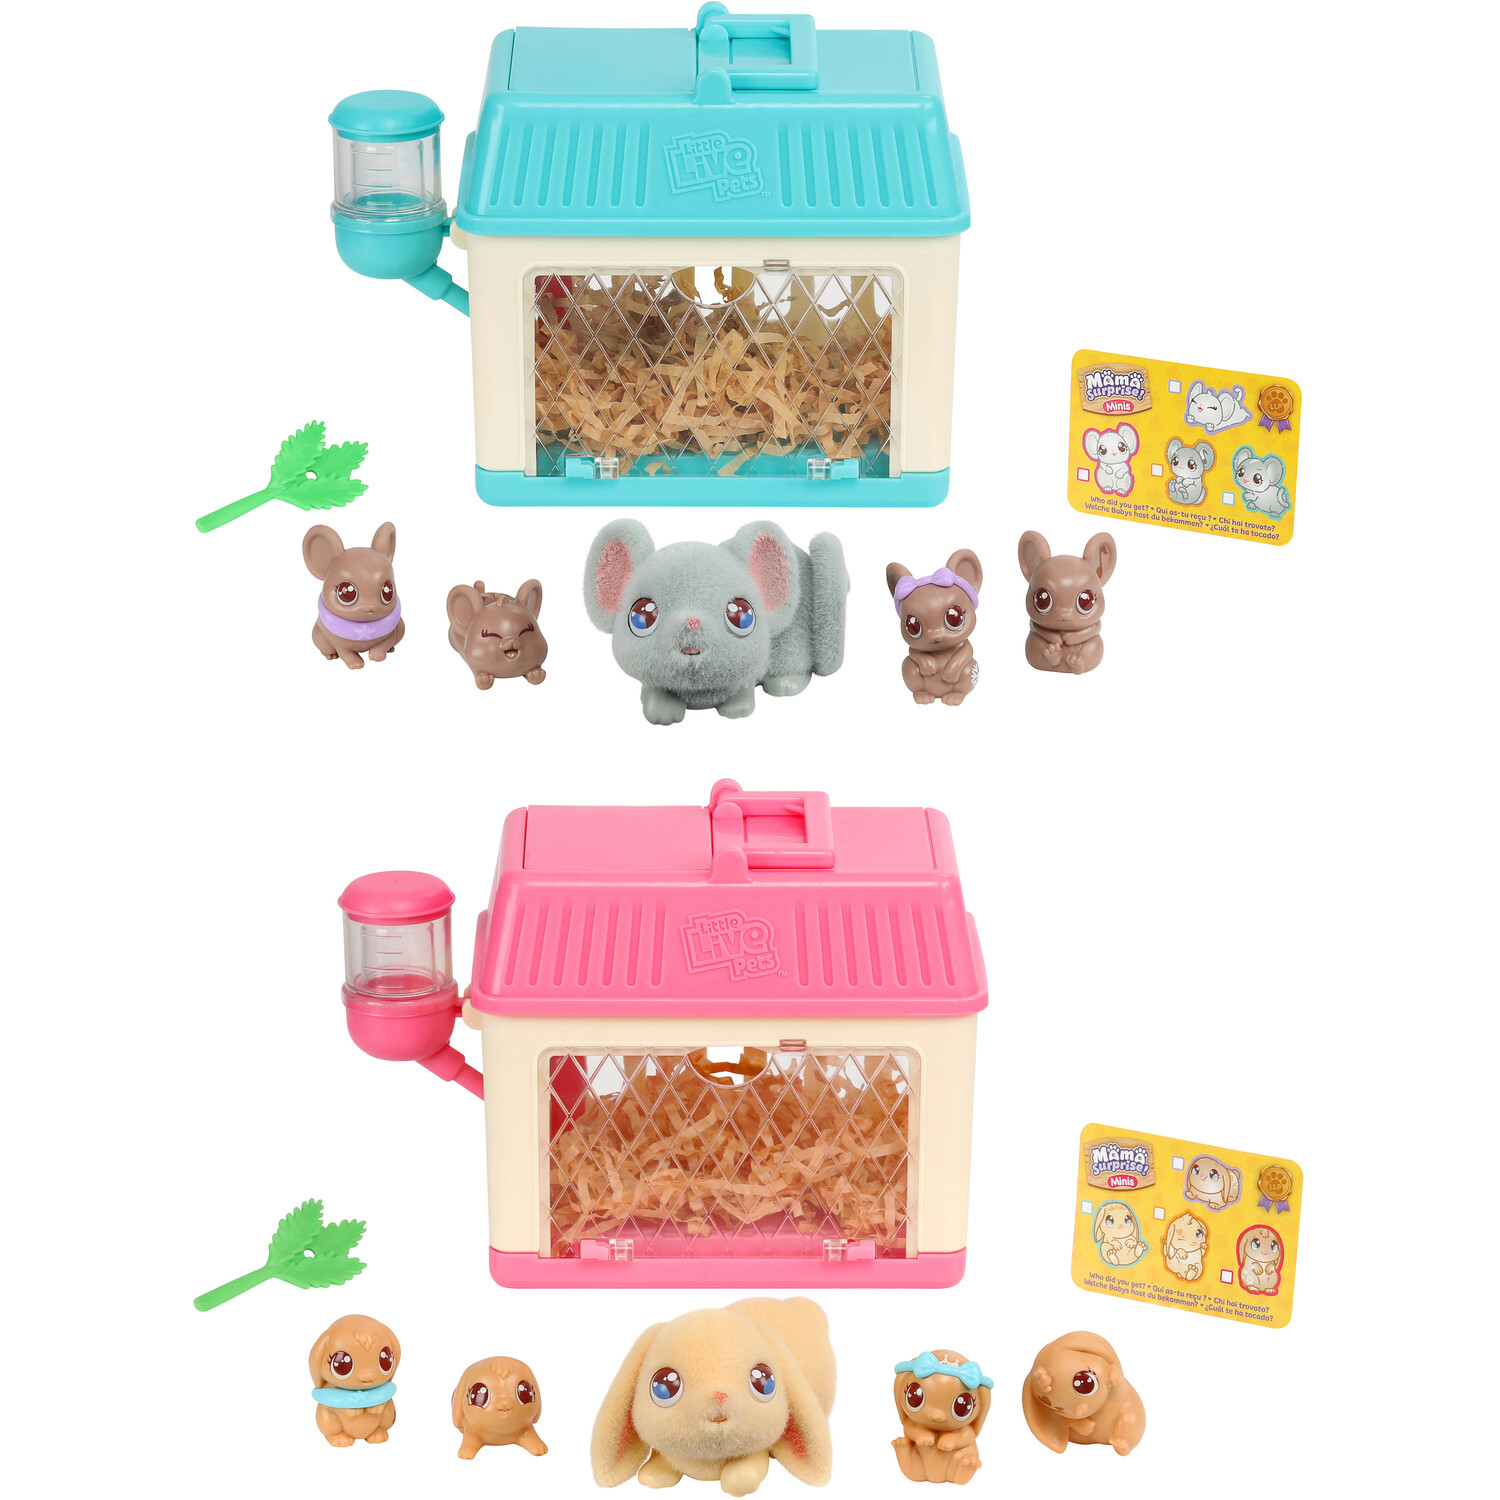 Single Little Live Pets Mama Surprise Minis in Assorted styles Image 10